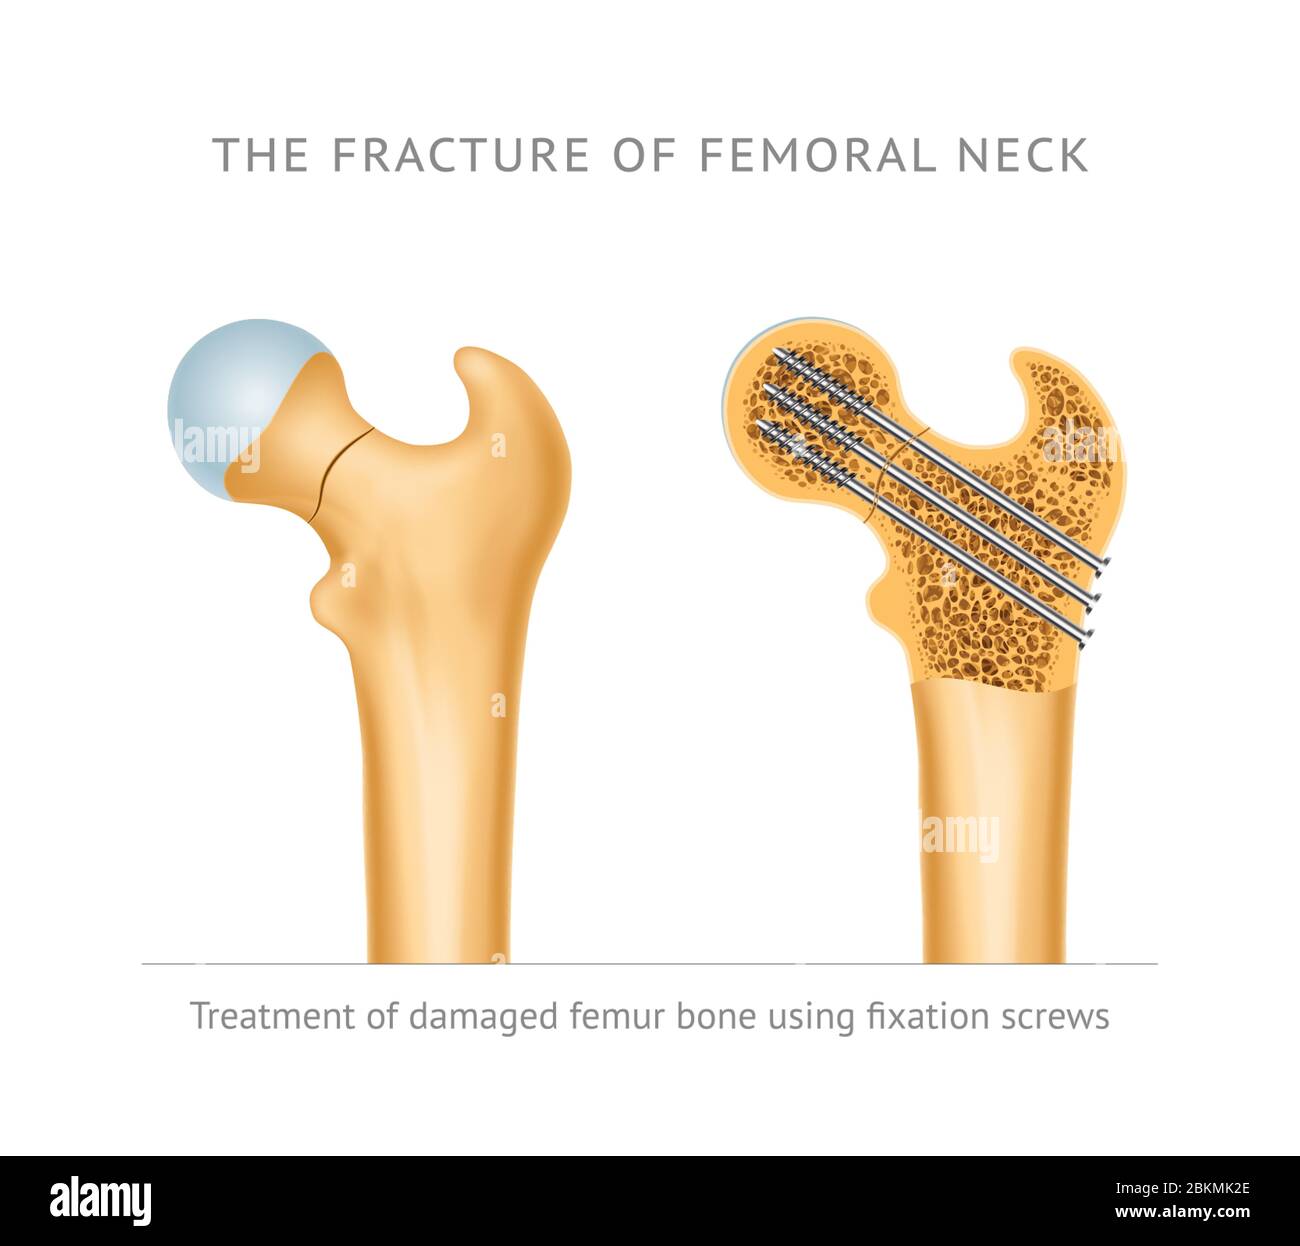 The fracture of femoral neck. Treatment of damaged femur bone neck using fixation screws Stock Vector